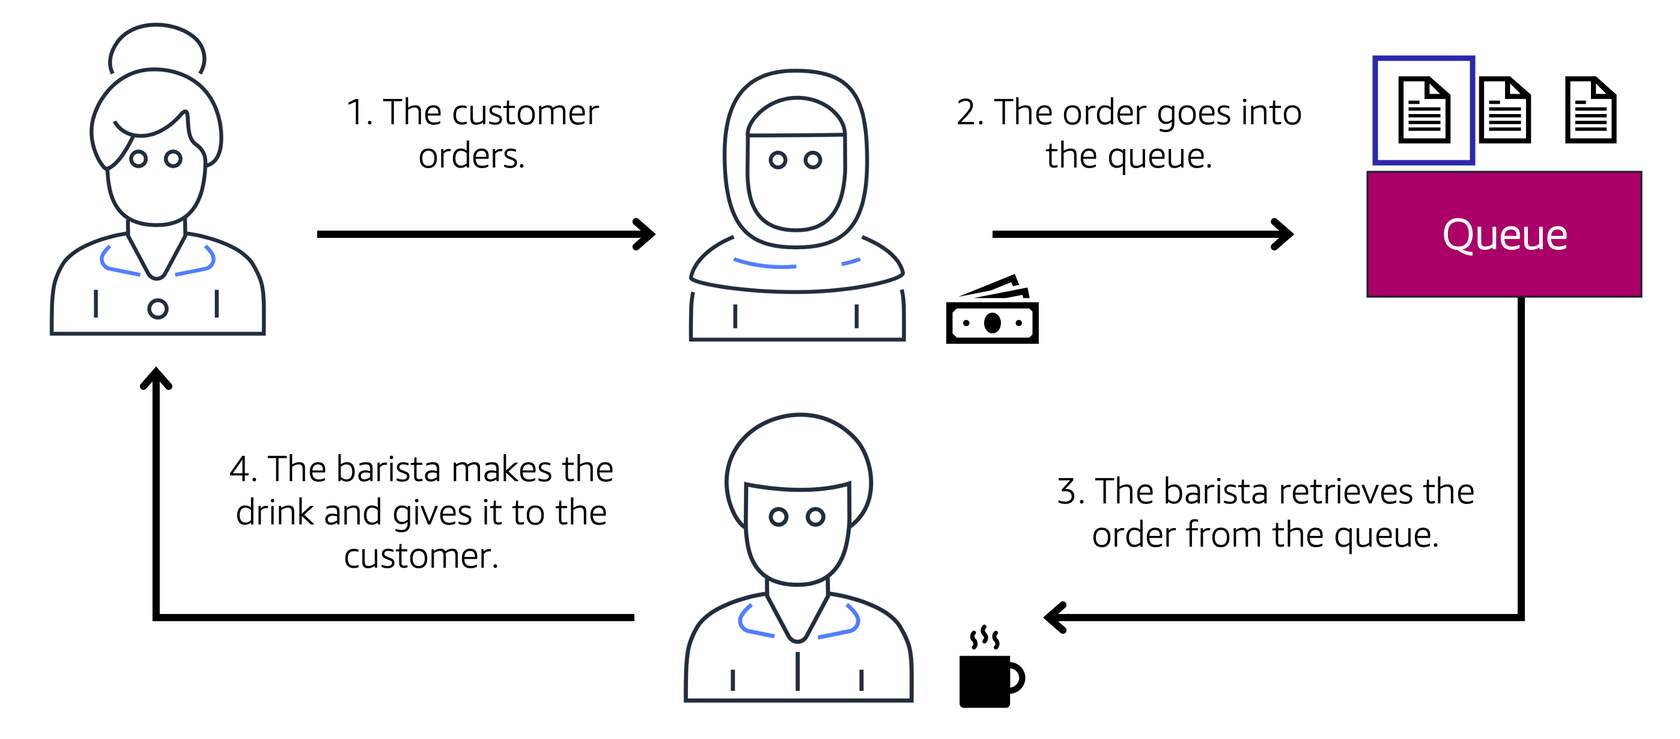 Workflow between customer order to cashier to queue to barista